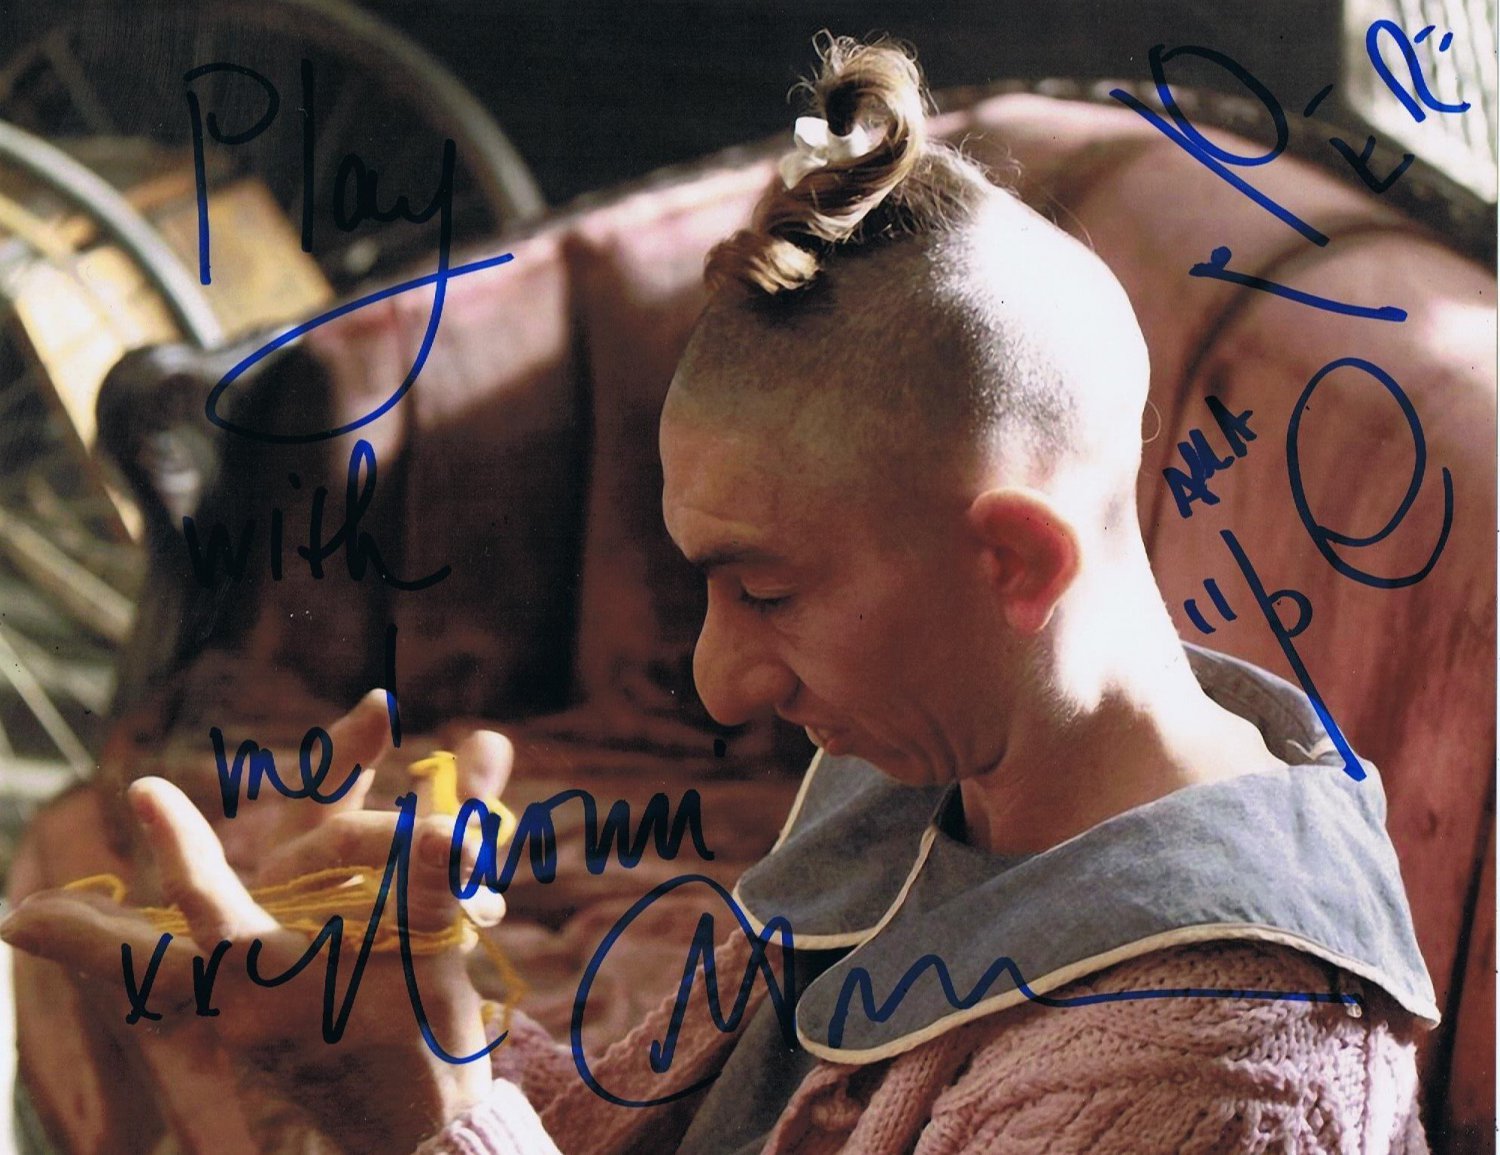 Naomi Grossman Signed & Mounted 8 x 10" Autographed Photo American Horror Story (Reprint 555)